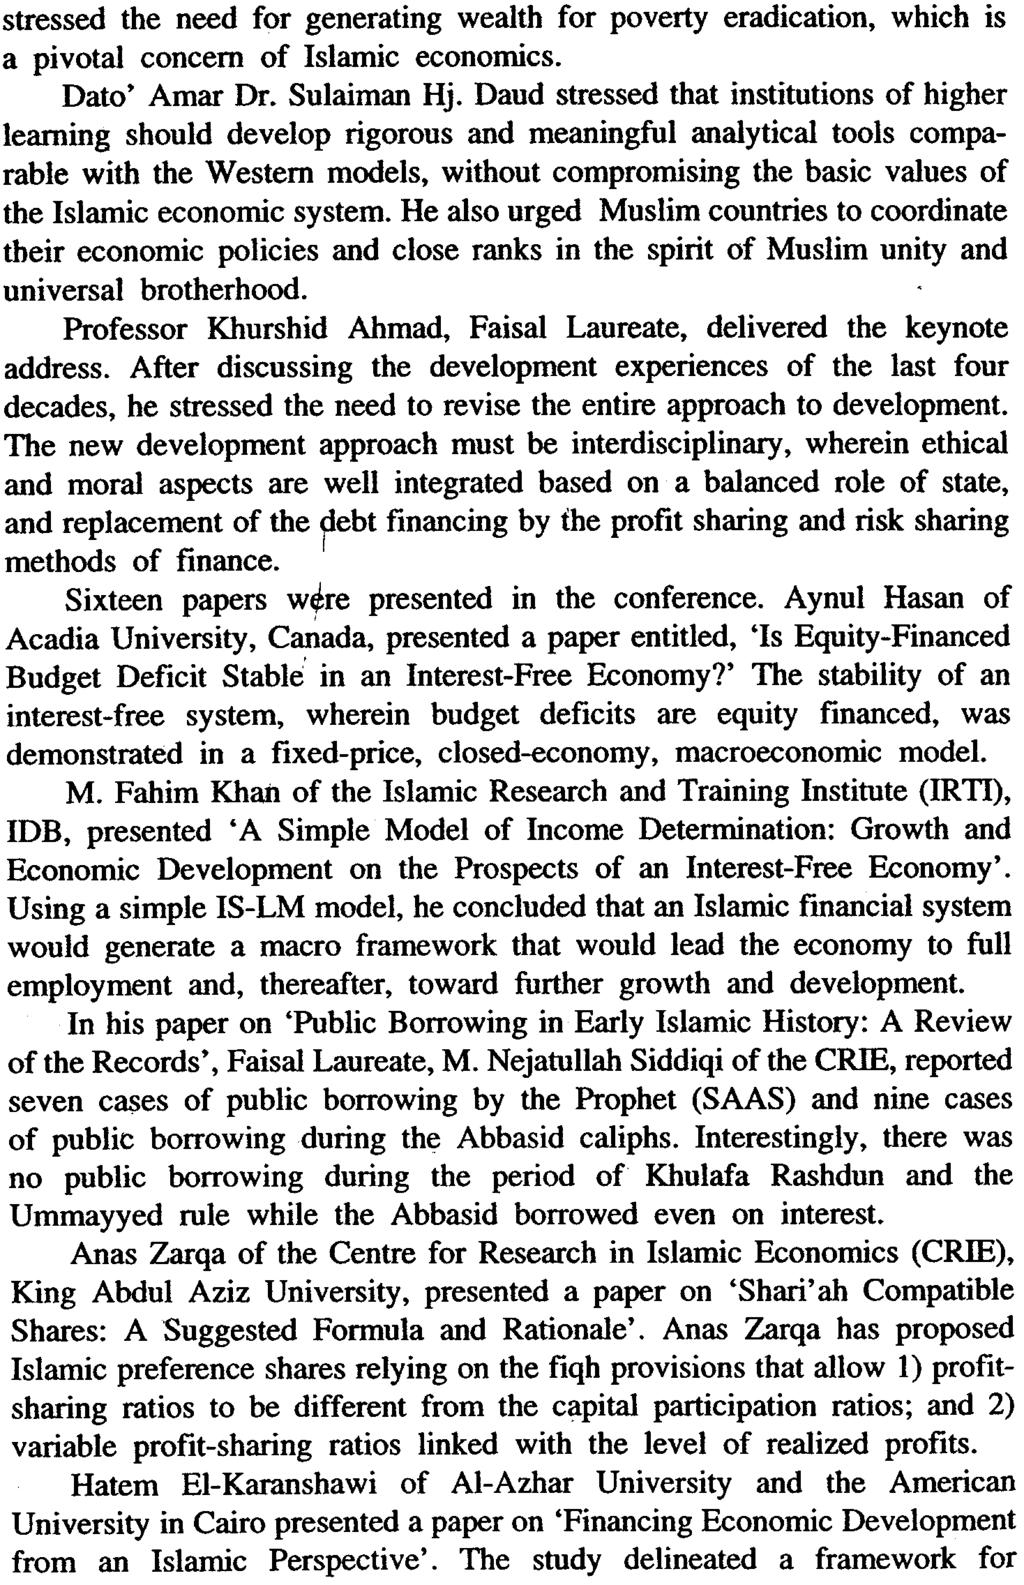 98 Intellectual Discourse Vol. 1, No.1, October 1993 stressed the need for generating wealth for poverty eradication, which is a pivotal concern of Islamic economics. Dato' Amar Dr. Sulaiman Hj.